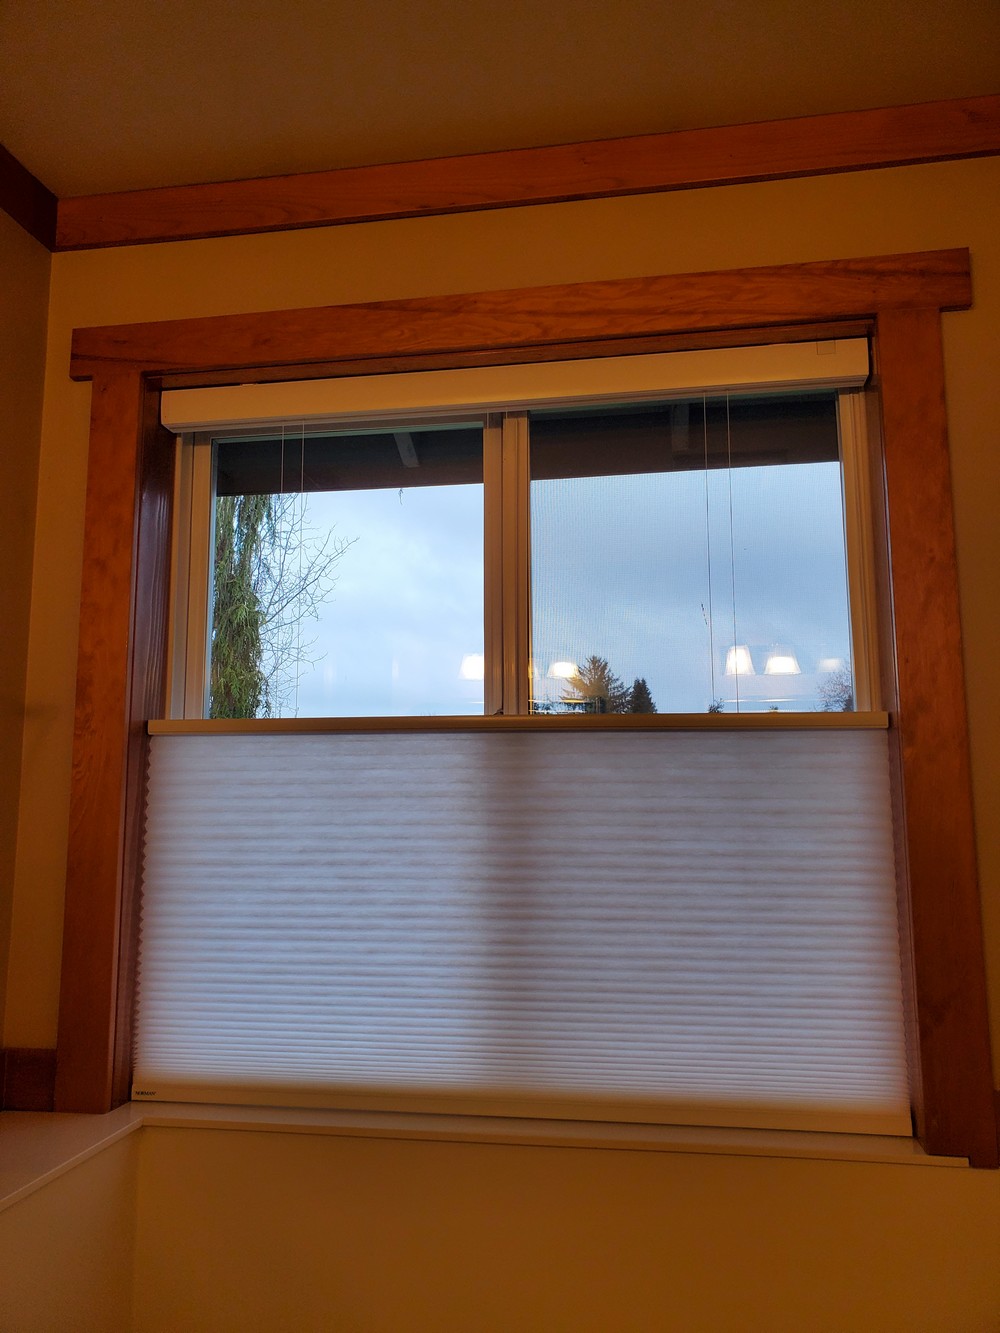 Excellent Motorized Top-Down Bottom-Up Honeycomb Shades in Monroe, WA Image